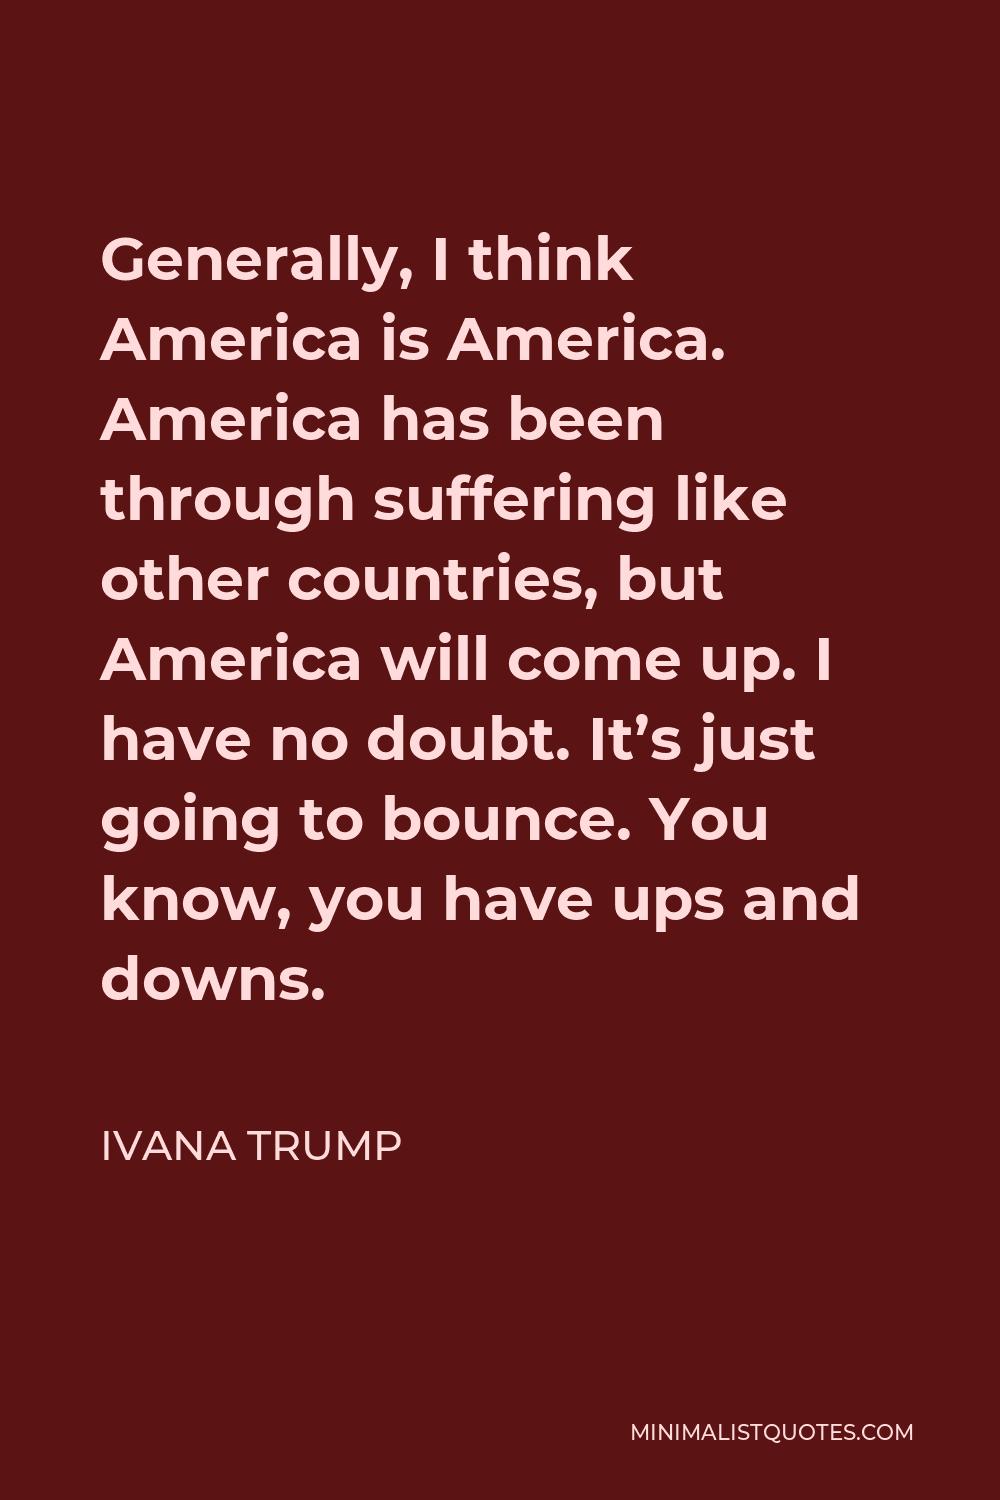 Ivana Trump Quote - Generally, I think America is America. America has been through suffering like other countries, but America will come up. I have no doubt. It’s just going to bounce. You know, you have ups and downs.